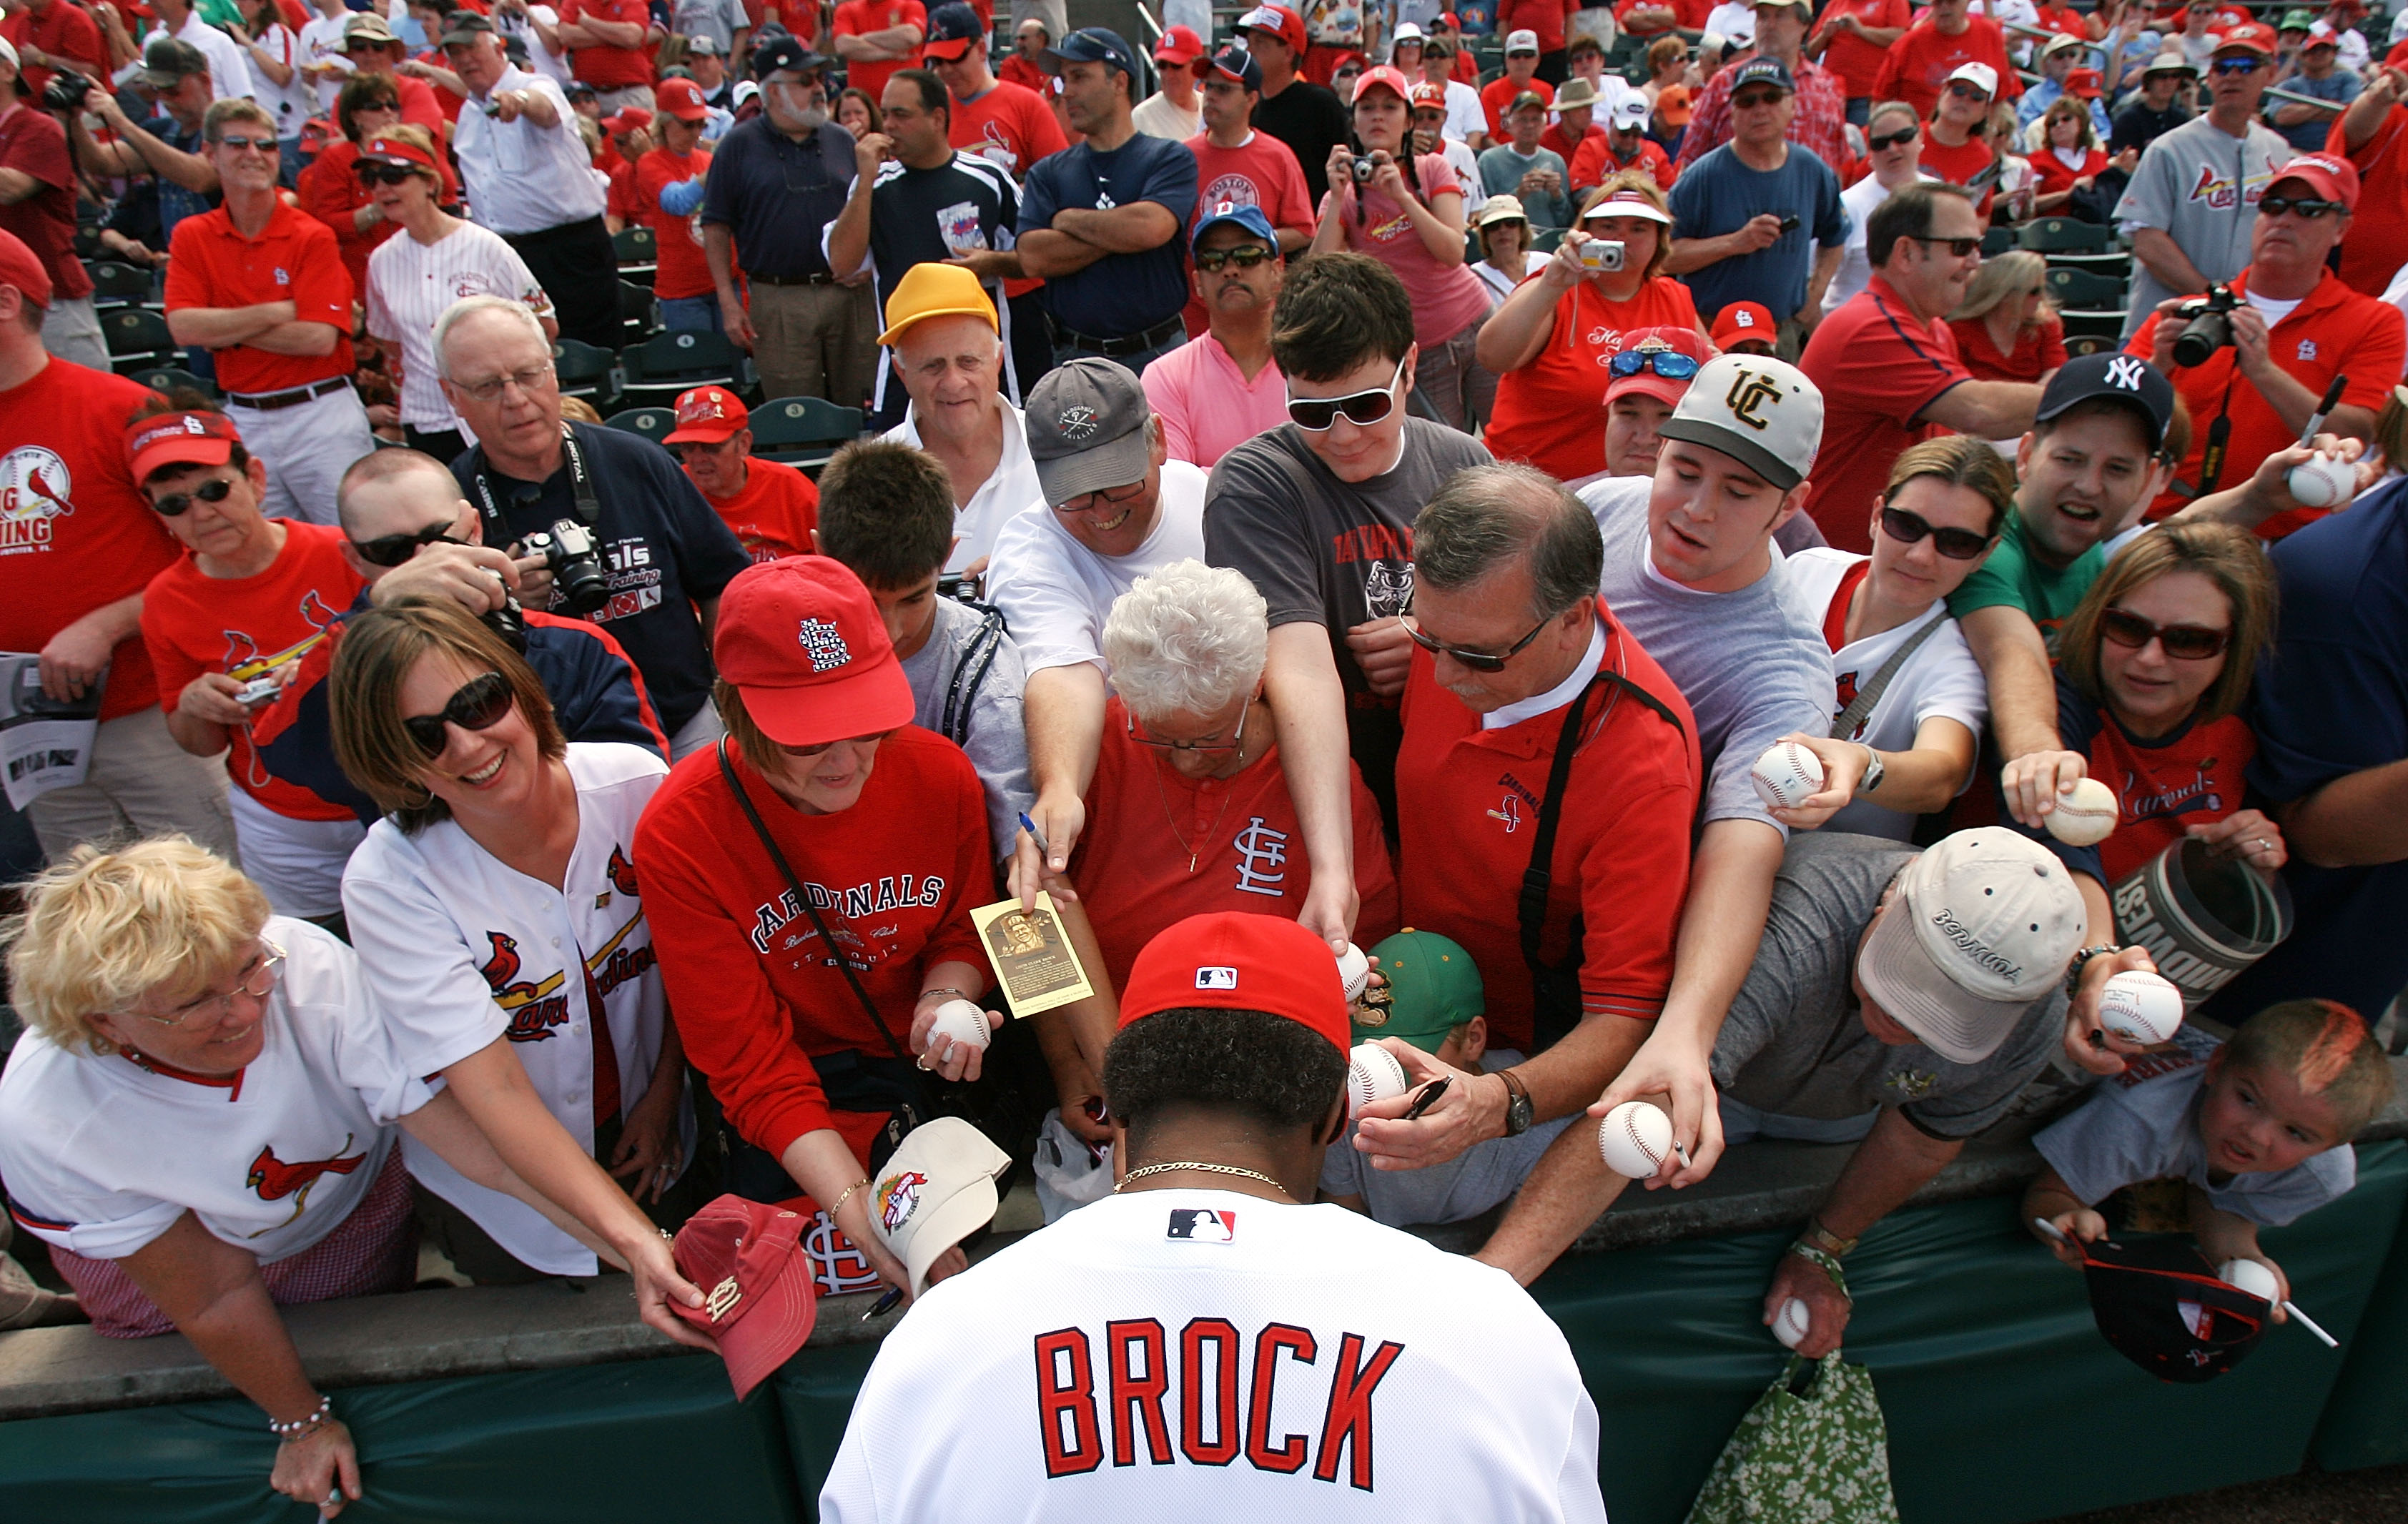 JUPITER, FL - MARCH 10:  Hall-of-Famer Lou Brock #20 of the St Louis Cardinals signs autographs for fans before taking on the Washington Nationals at Roger Dean Stadium on March 10, 2010 in Jupiter, Florida.  (Photo by Doug Benc/Getty Images)